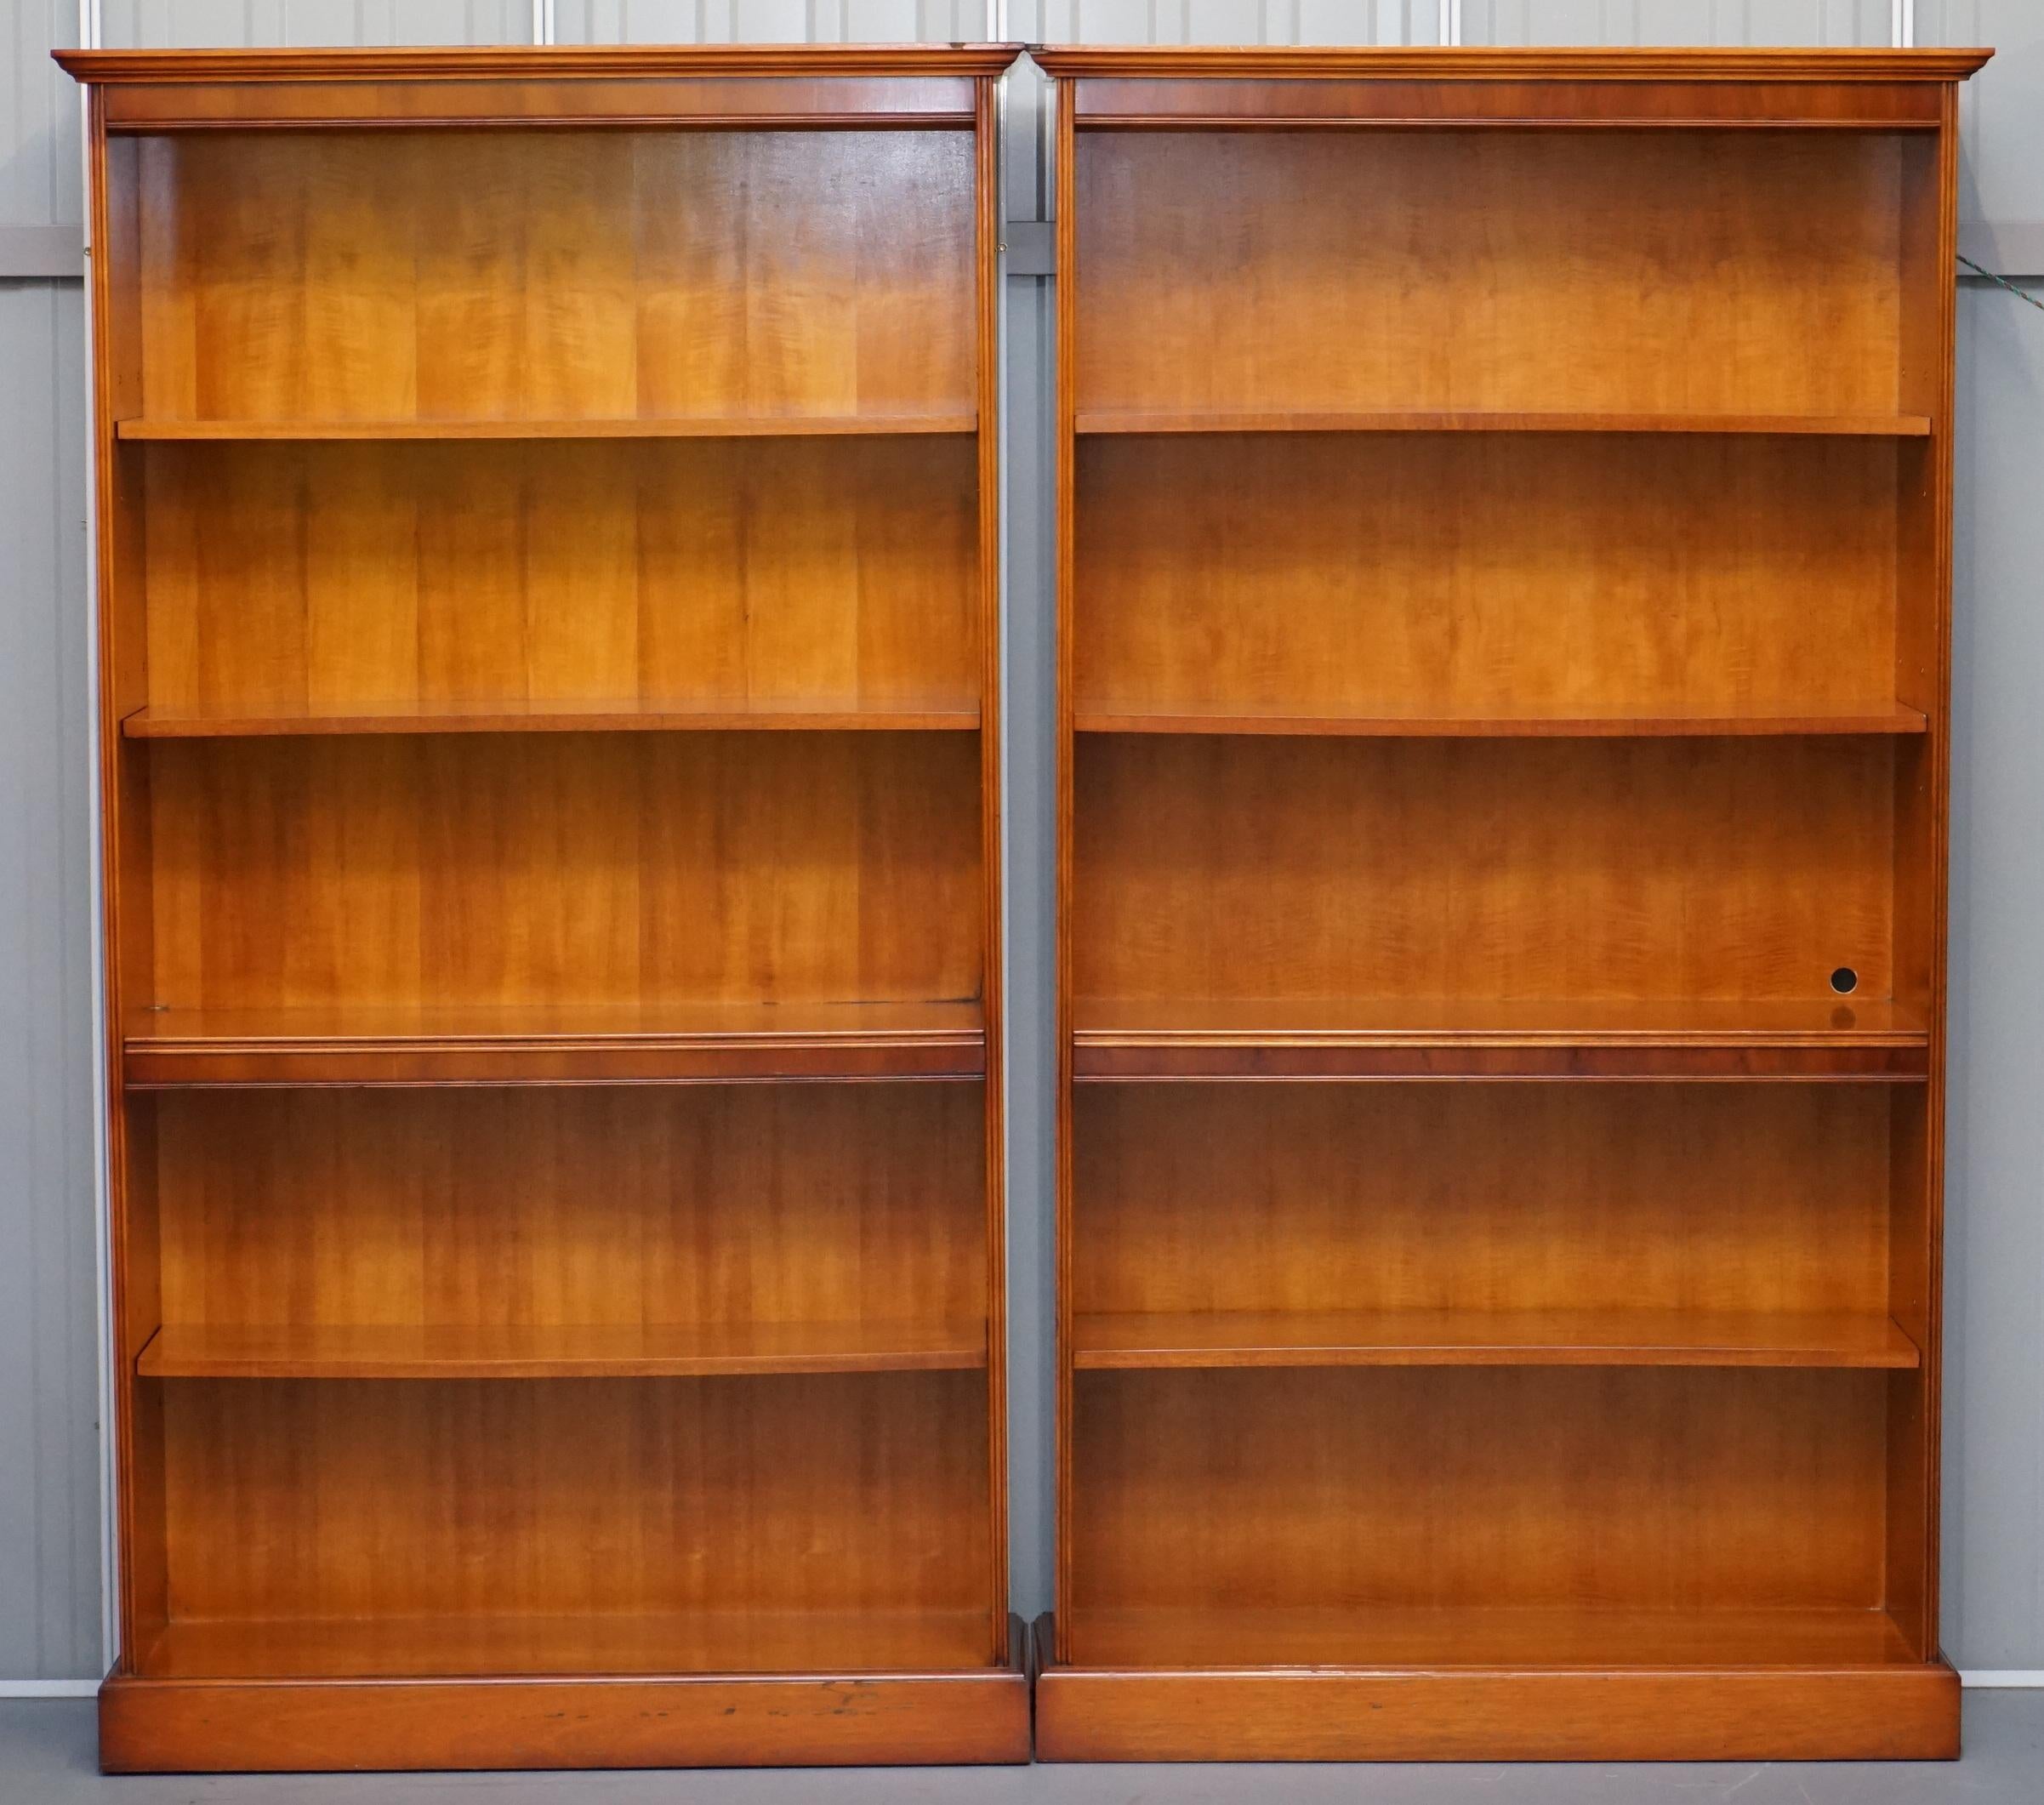 We are delighted to offer for sale this stunning pair of hand made in England yew Bradley library bookcases with height adjustable shelves

A good looking well made pair, ideally suited from any setting really, at home library or living